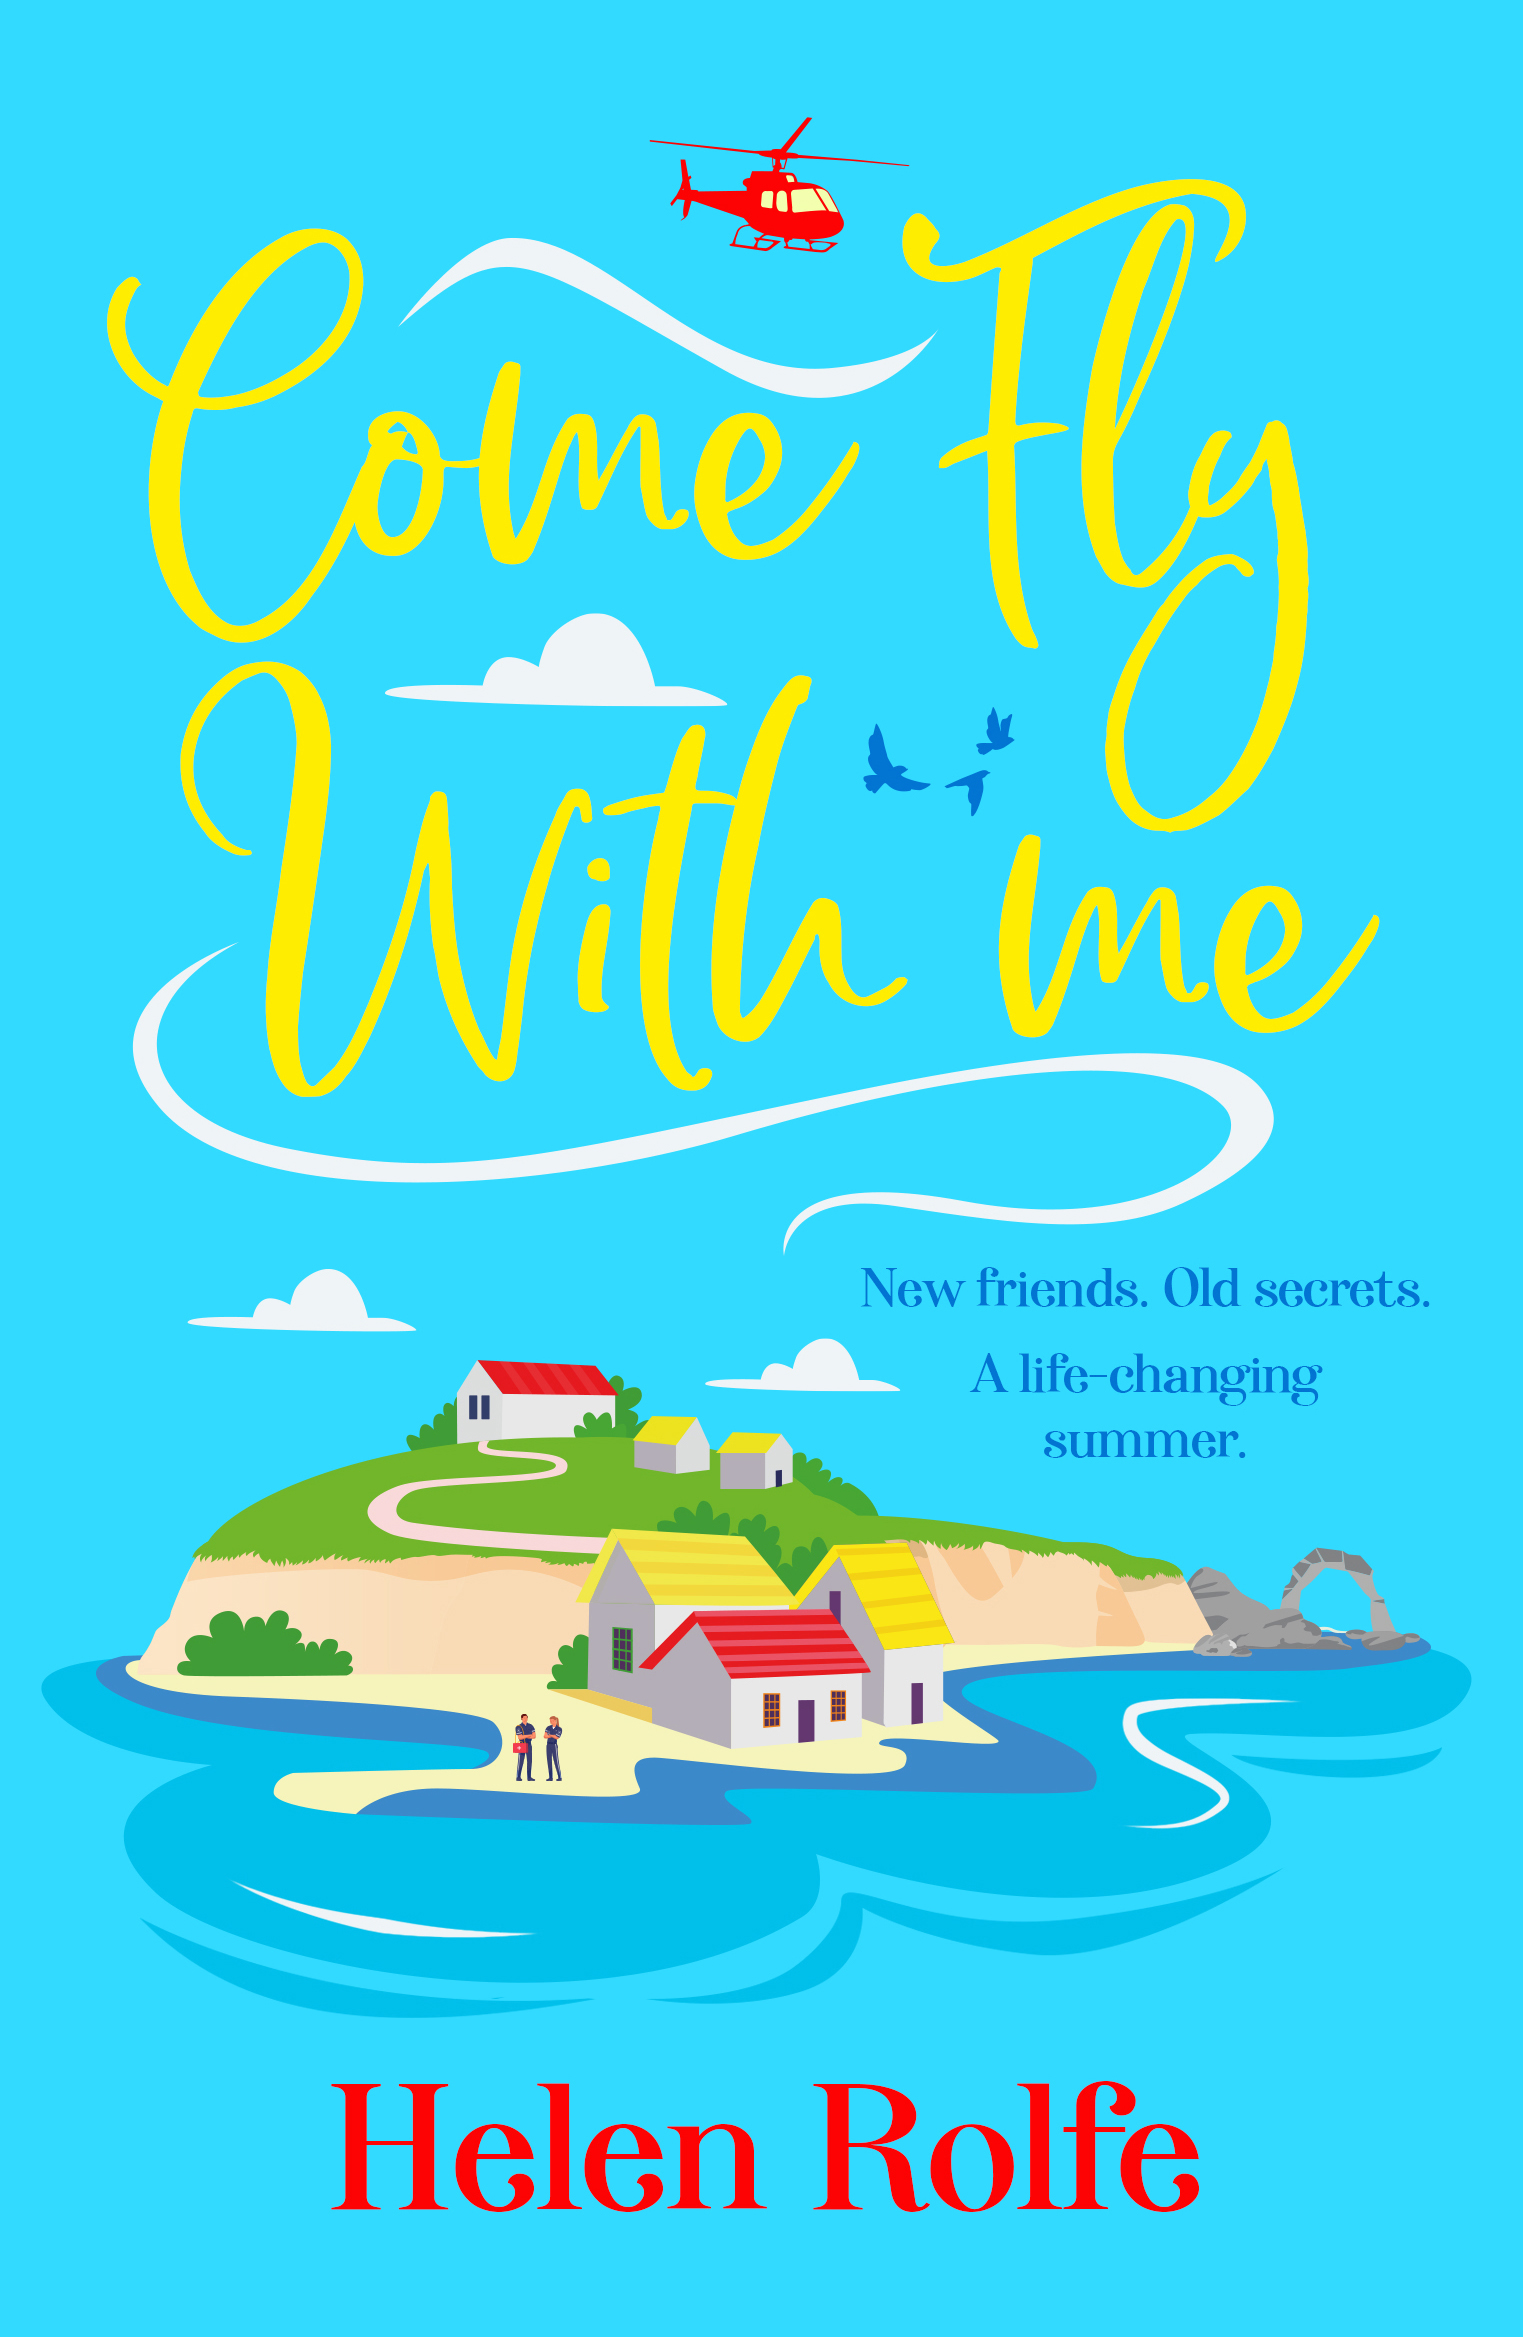 The Comfy Chair - Book Reviews : Come Fly With Me - Helen Rolfe